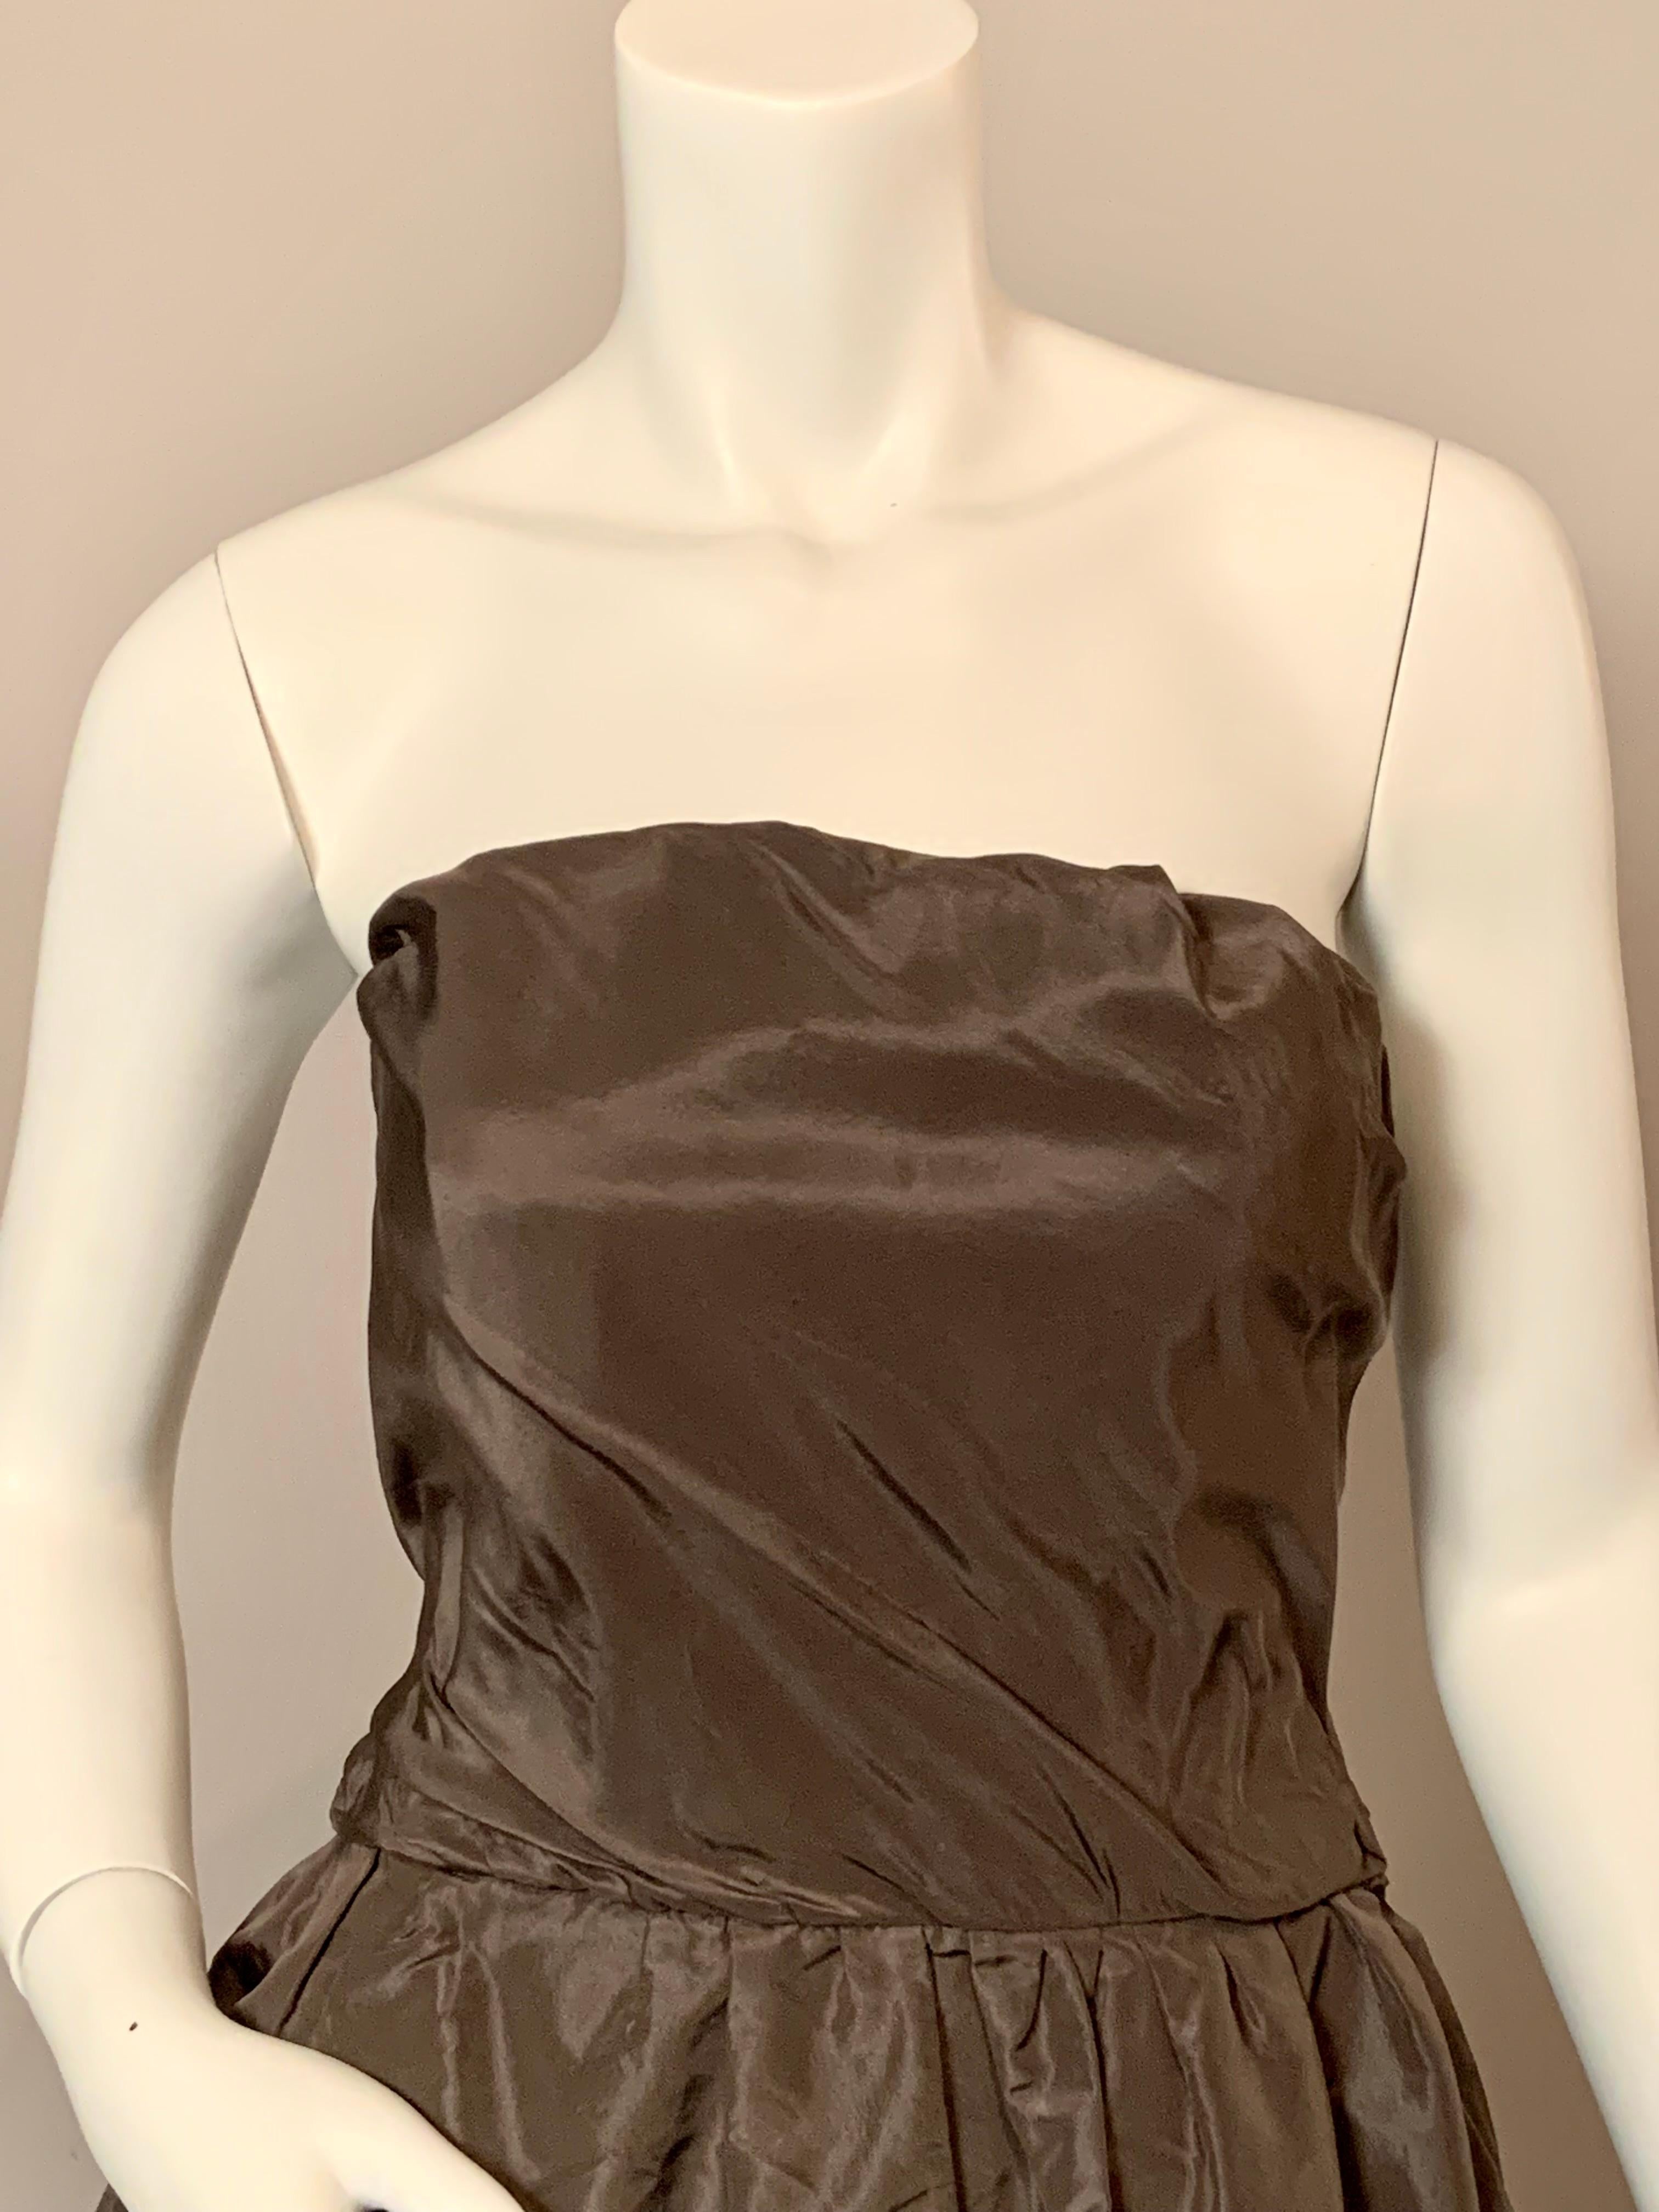 A chic charcoal grey gown with a hint of mauve, in a rich and rustling silk from Sybil Connolly, the Irish Couturier, is simple and elegant at the same time, a perfect jewelry dress.
The bodice has a chic drape and the full skirt is loosely gathered